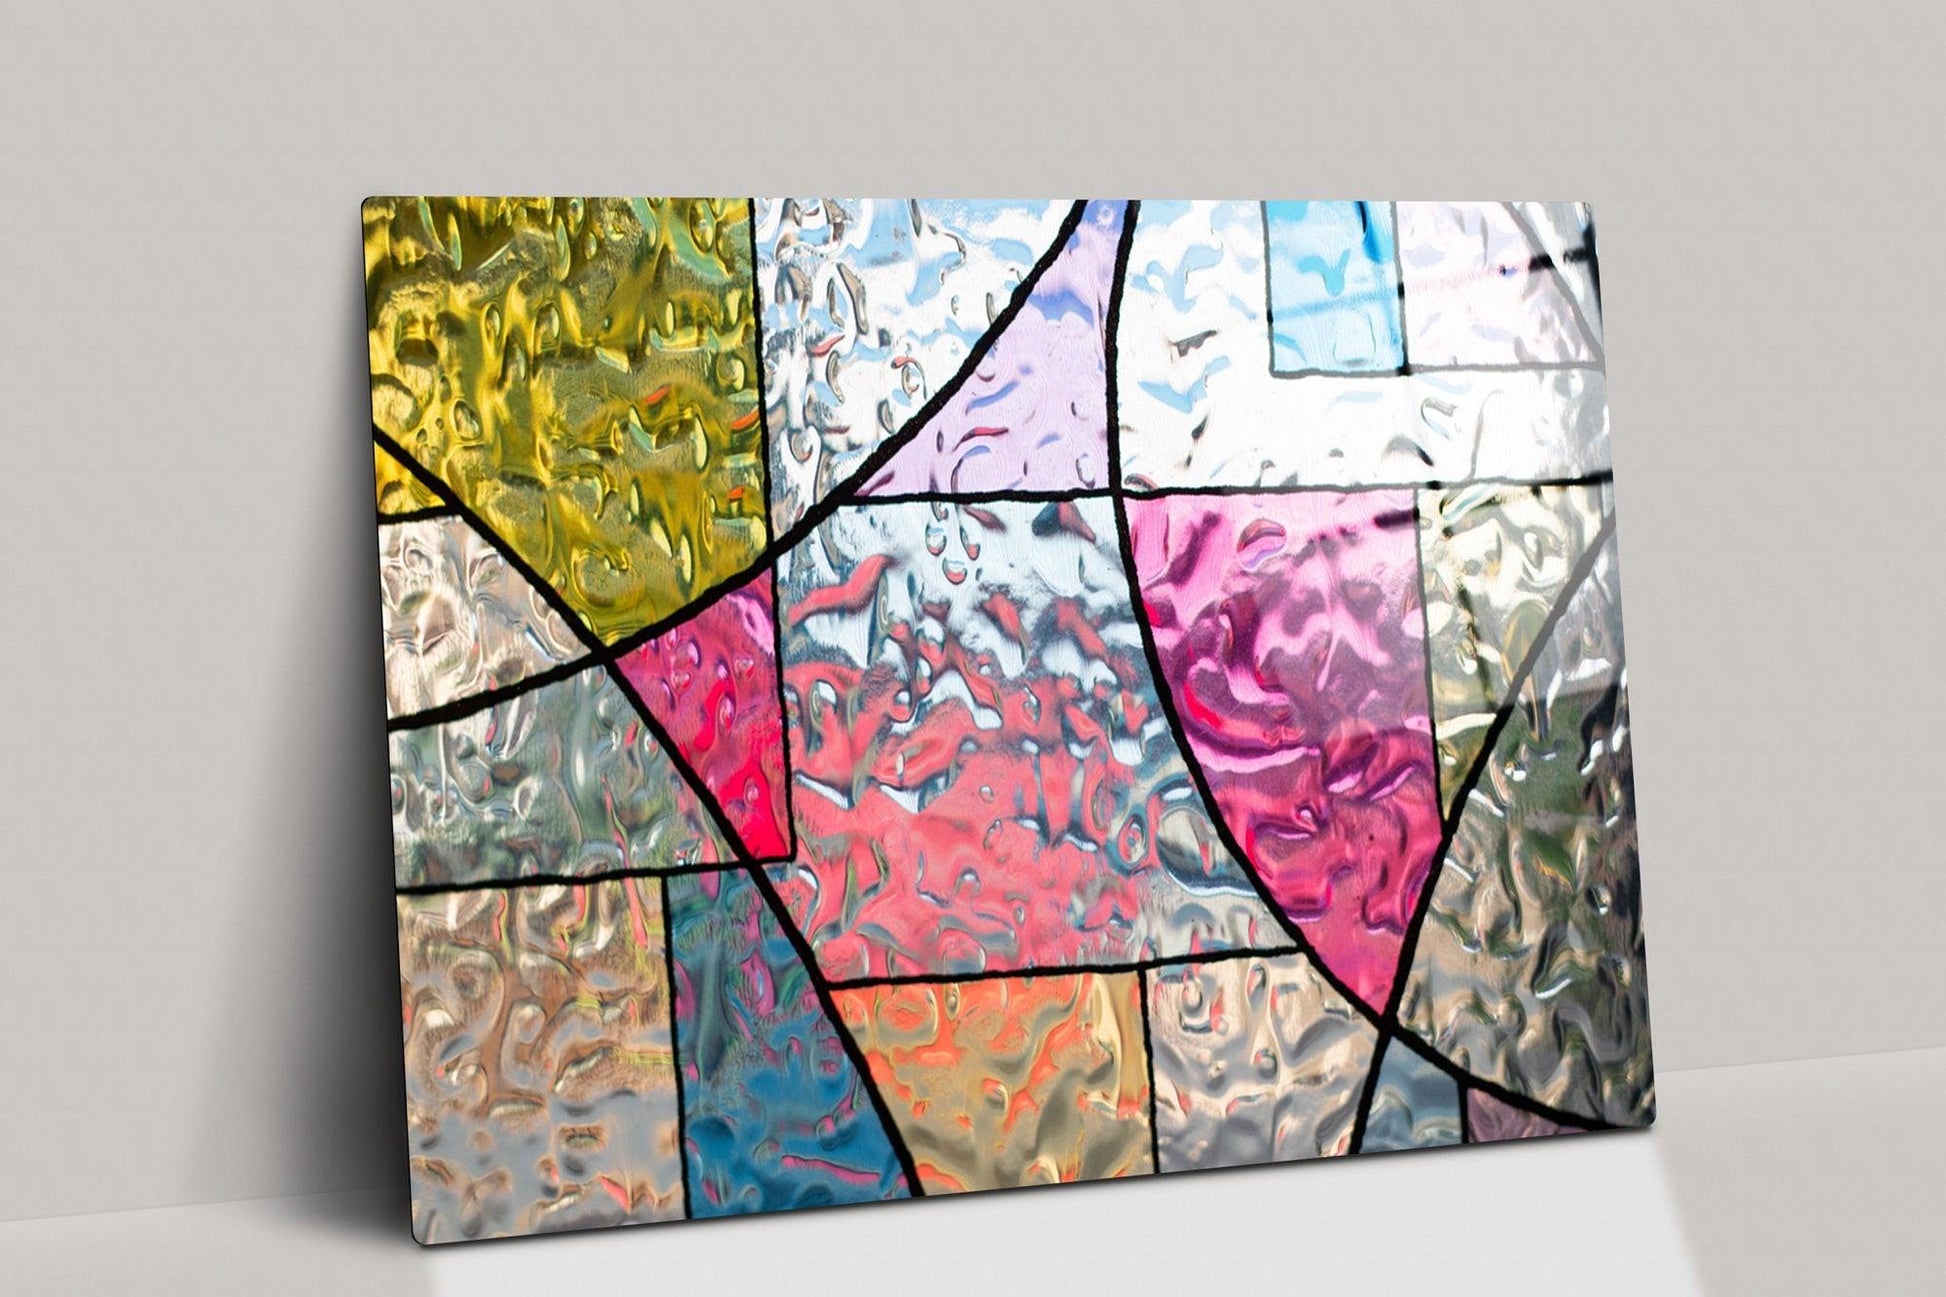 Hypnotic glass Wall Art Colorful Optical Illusion Art, 3D Effect Abst